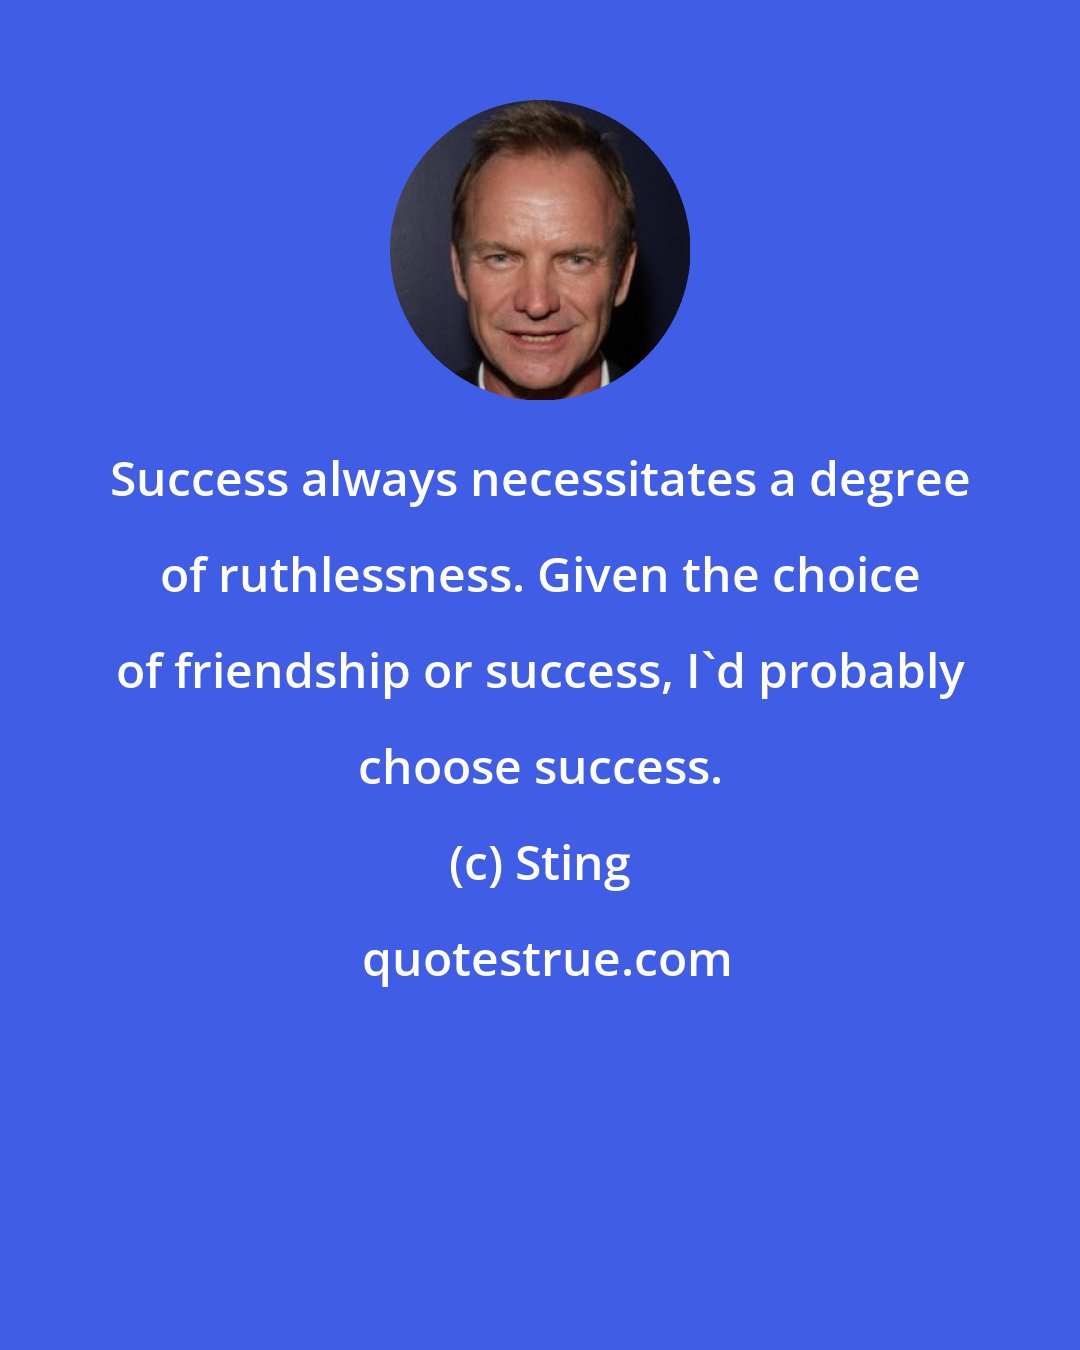 Sting: Success always necessitates a degree of ruthlessness. Given the choice of friendship or success, I'd probably choose success.